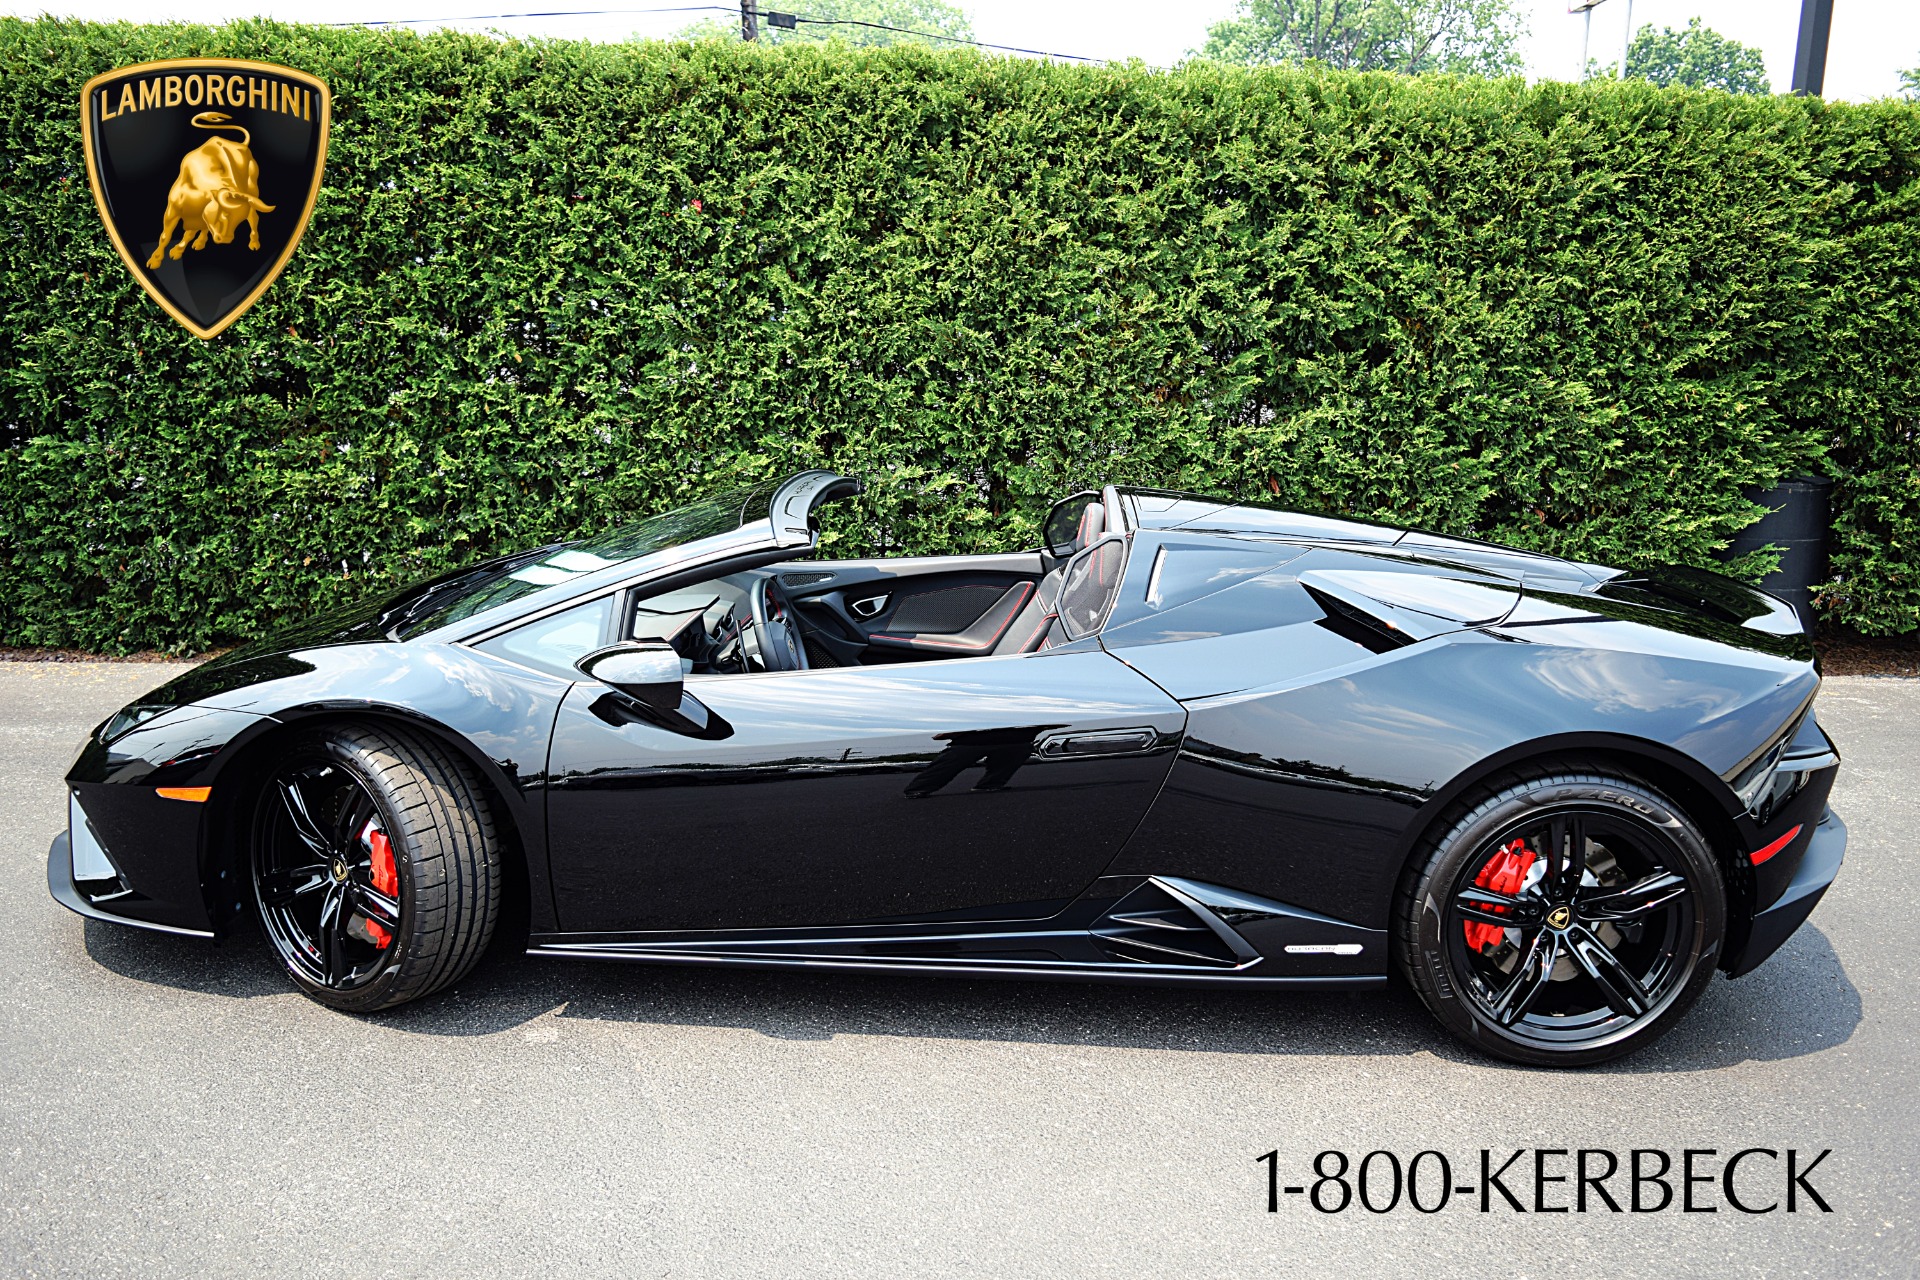 Used 2020 Lamborghini Huracan LP-610-2 EVO Spyder / LEASE OPTIONS AVAILABLE for sale Sold at Bentley Palmyra N.J. in Palmyra NJ 08065 2